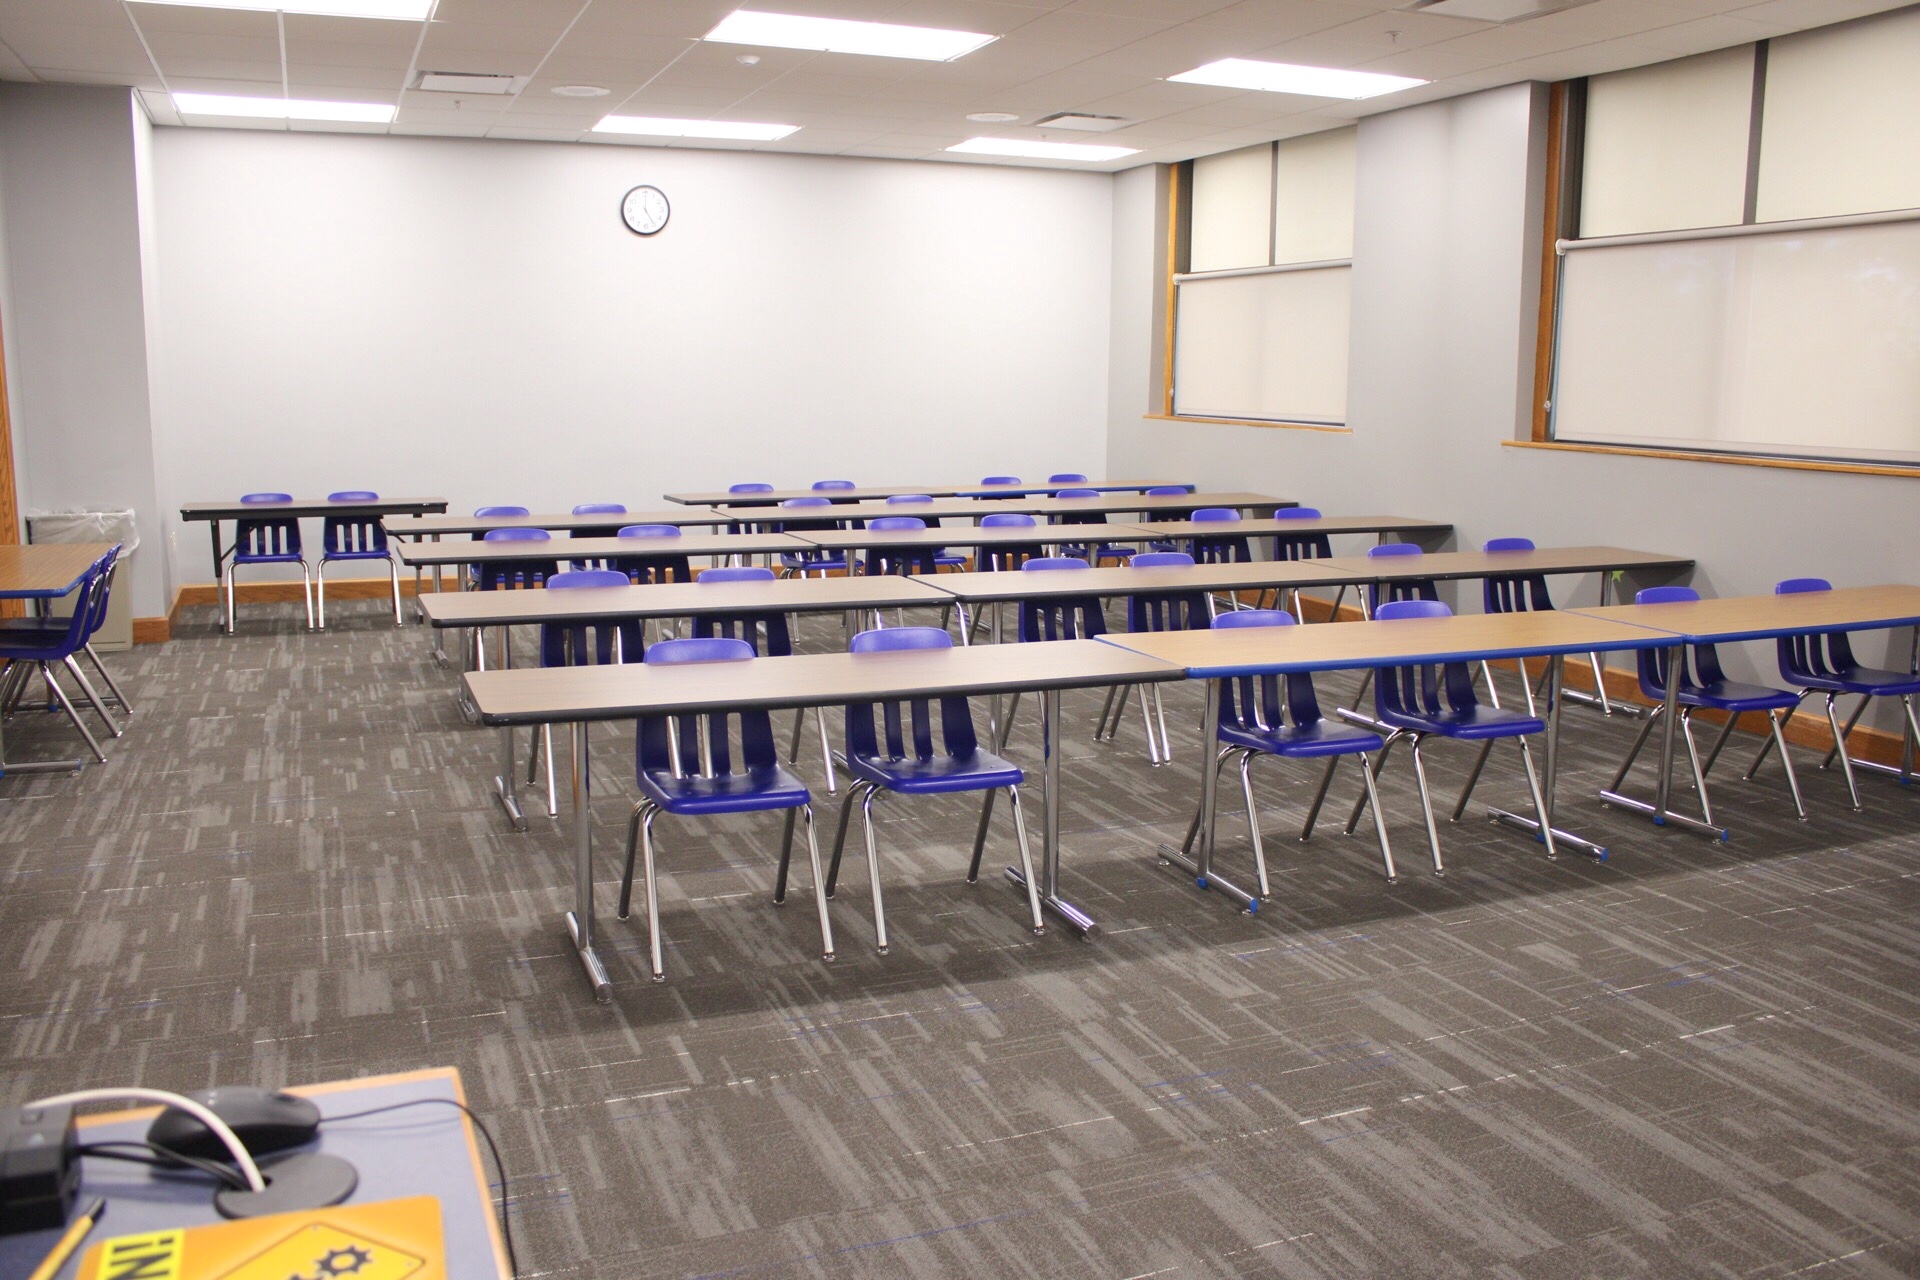 TJ Majors 302 viewed from the front of the classroom showing 5 rows of tables and chairs.